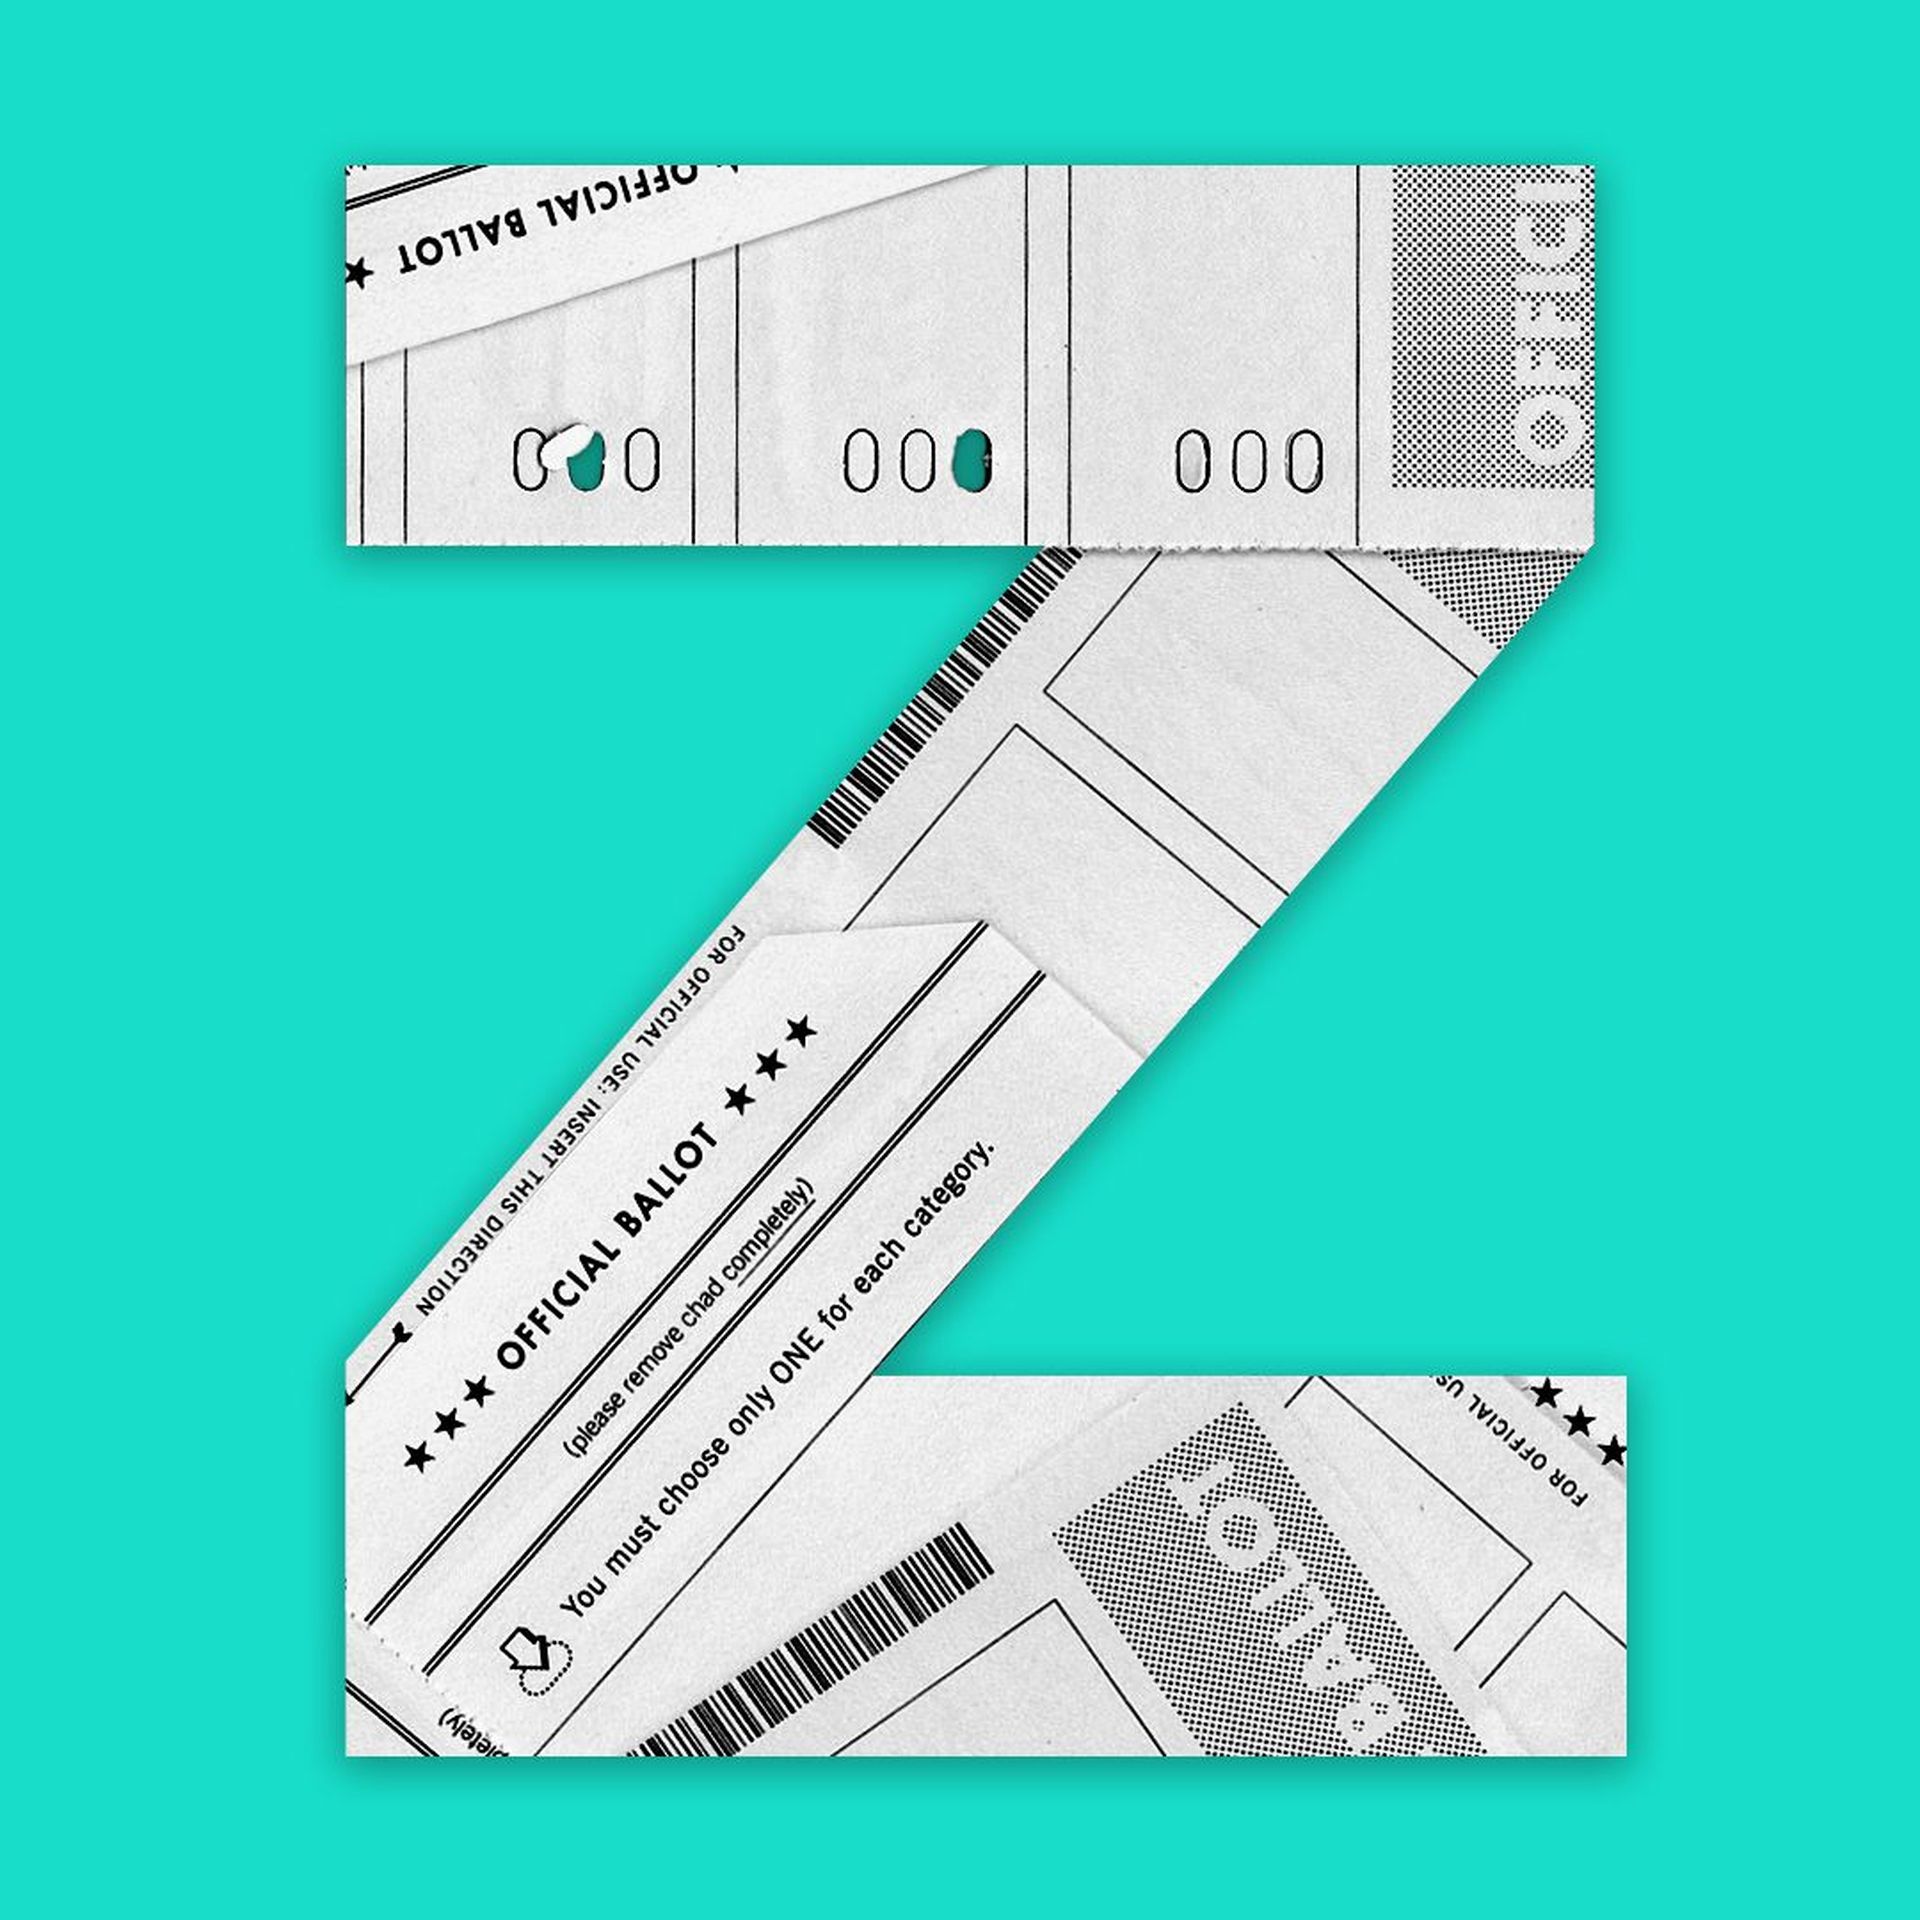 Illustration of the letter Z made out of overlapping ballots